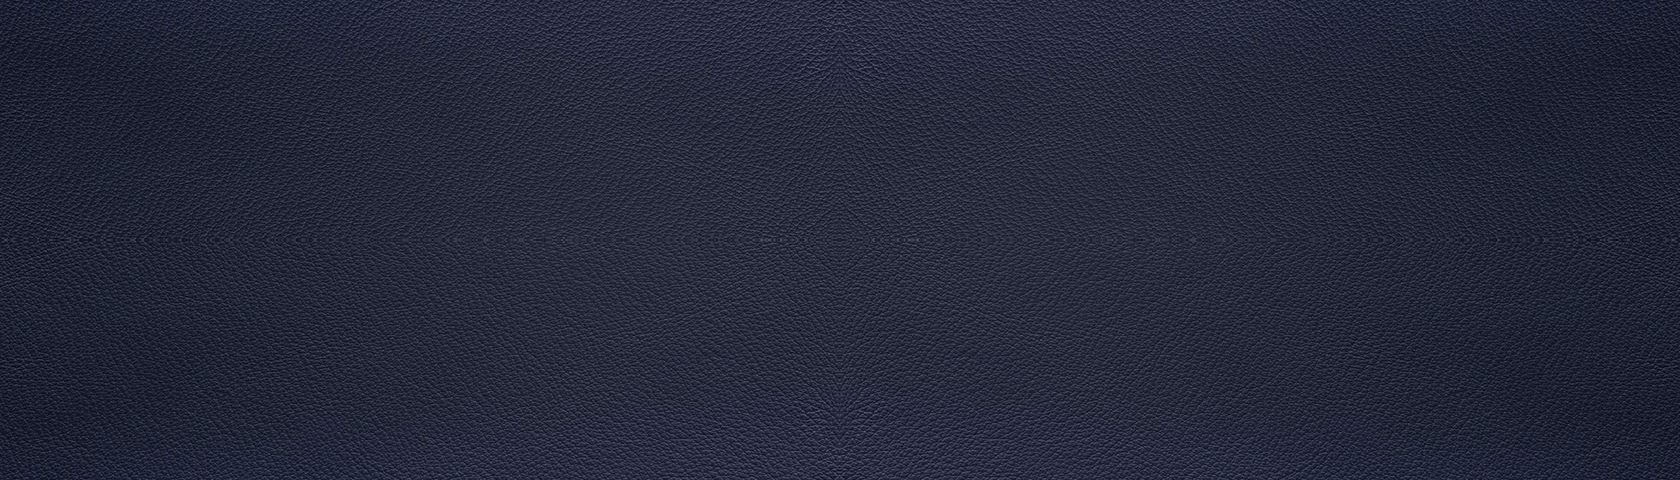 Midnight Blue Leather - Leather - HD Wallpaper 